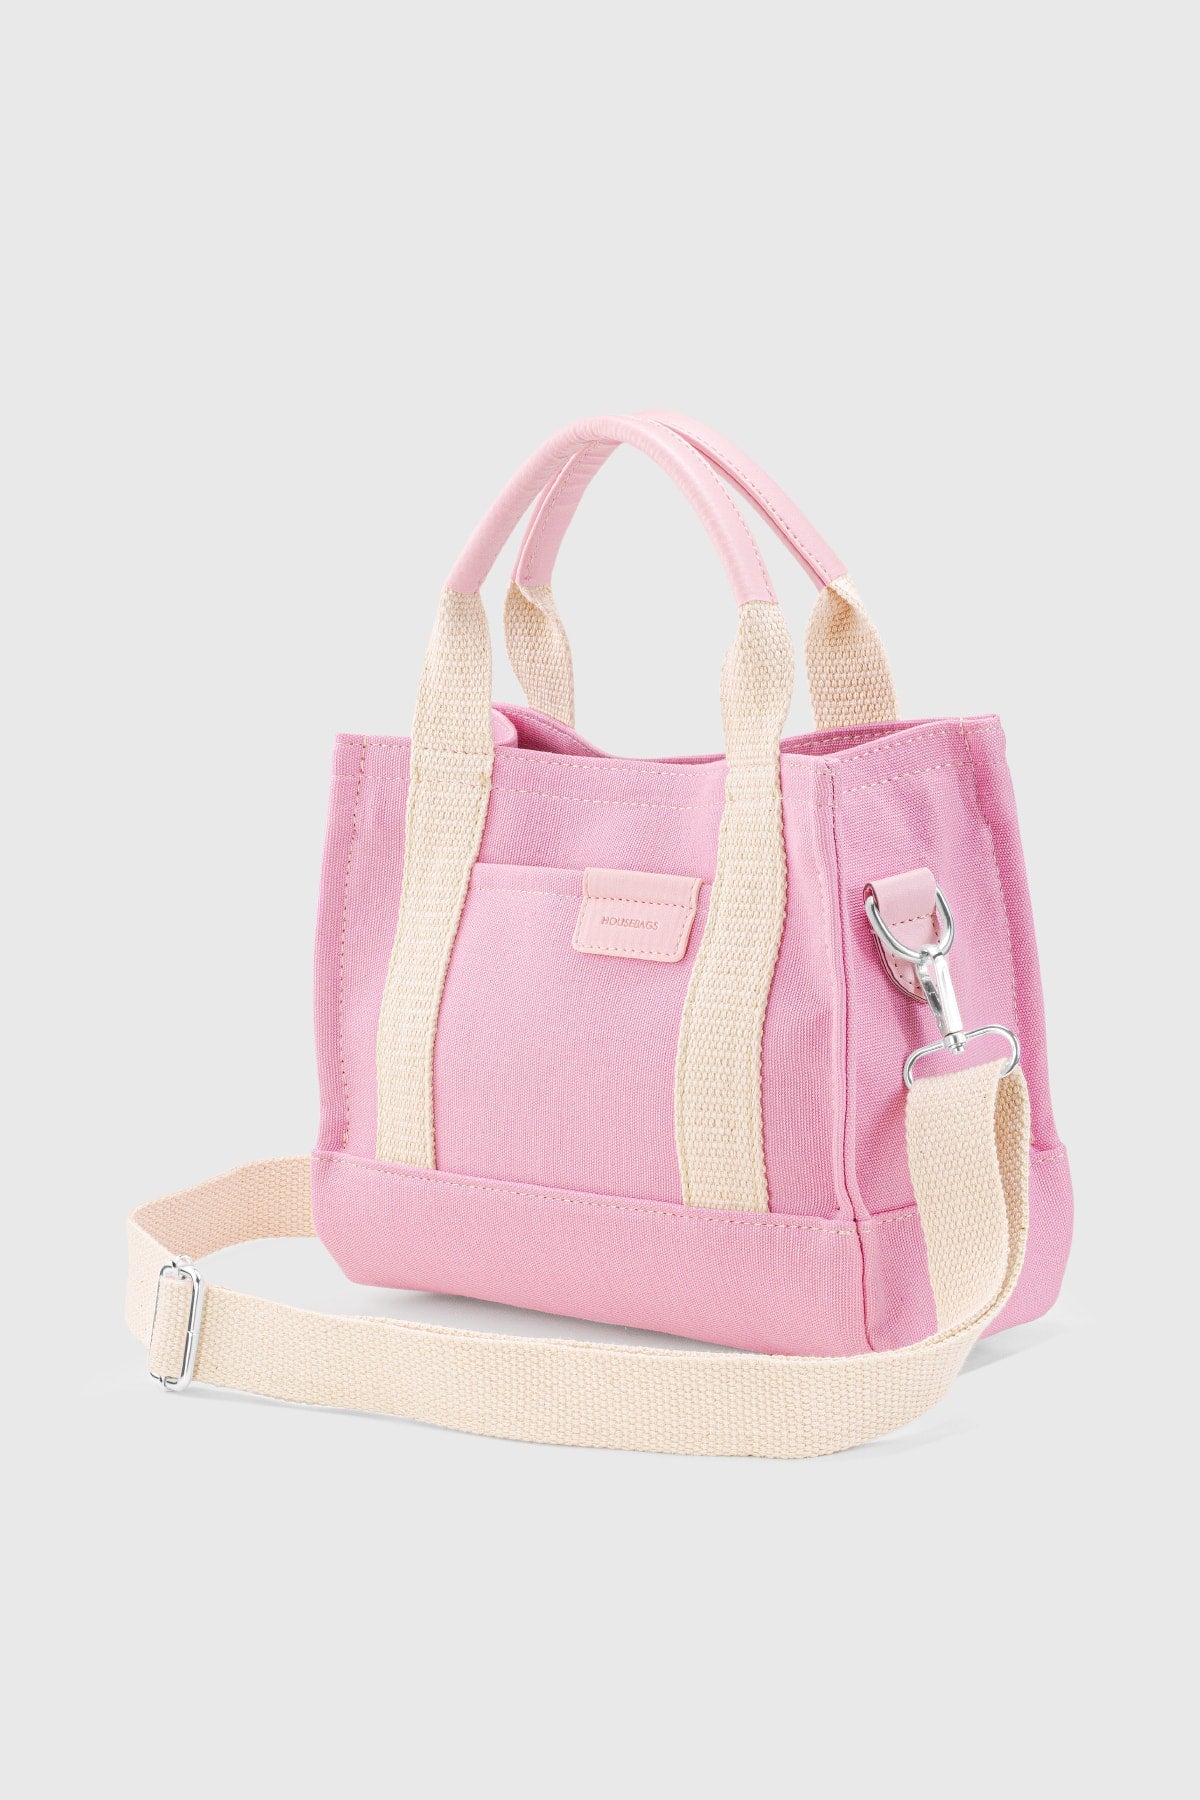 Women's Pink Canvas Tote Bag 232